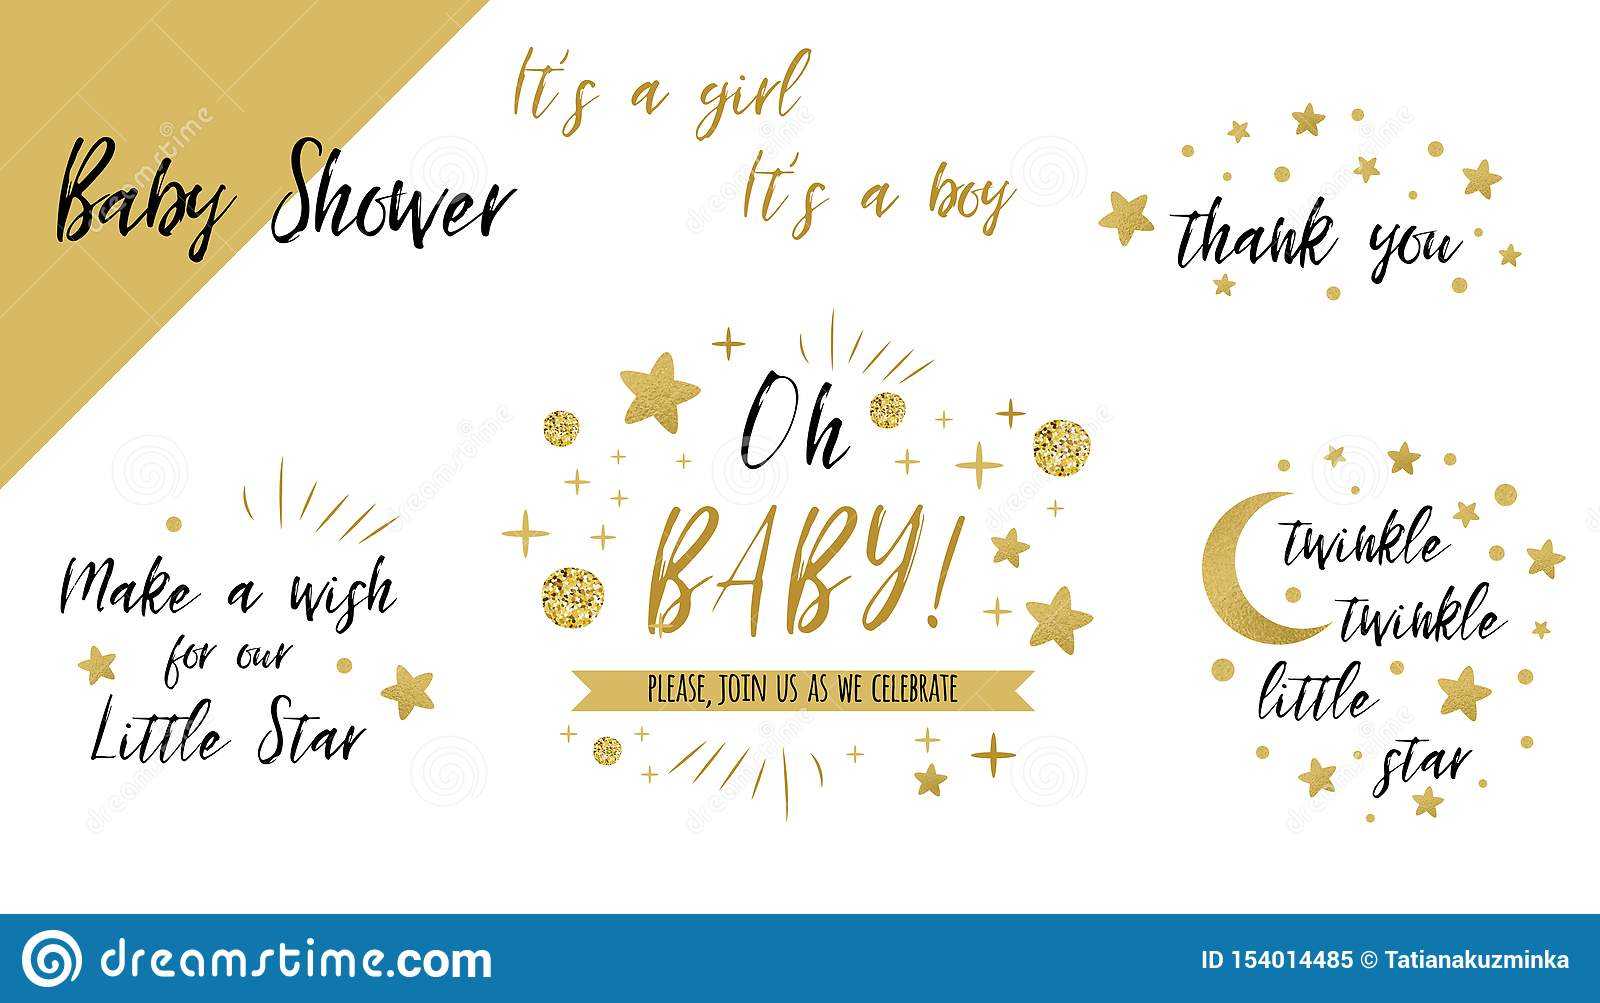 Baby Shower Set Gold Templates Twinkle Twinkle Little Star In Thank You Card Template For Baby Shower